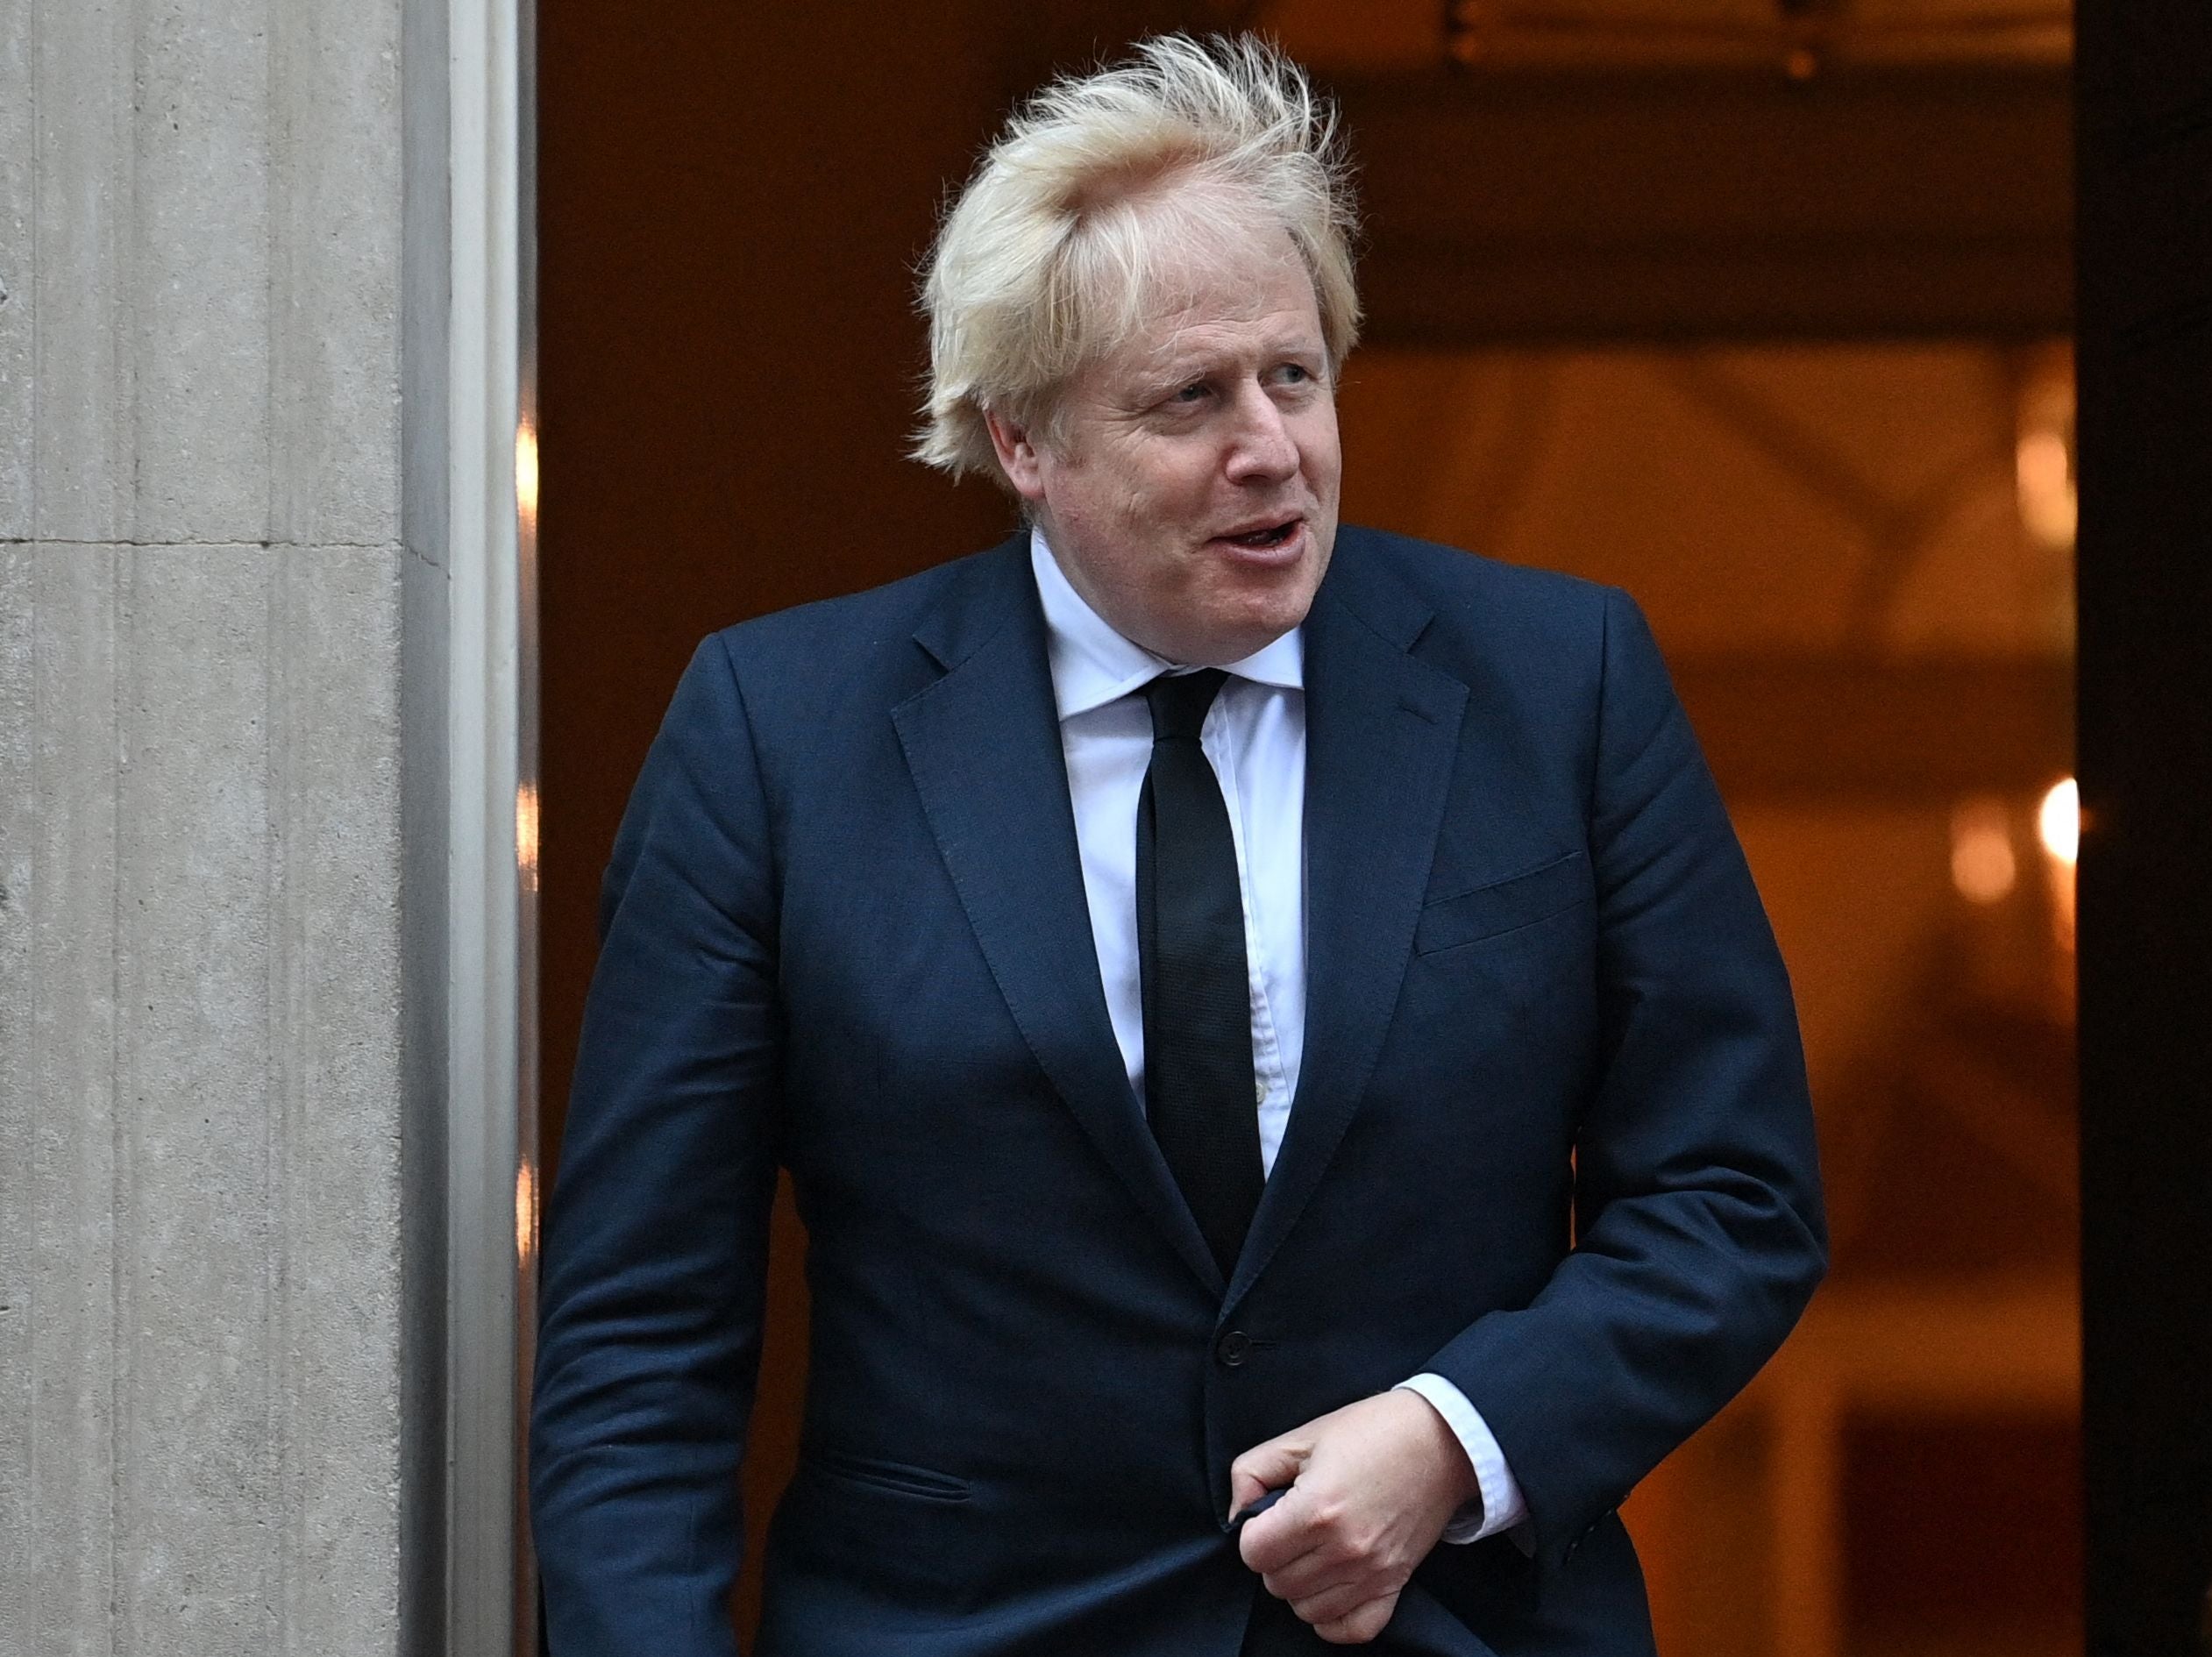 Cabinet Office bans ‘woke’ speakers critical of Boris from internal events – and the hypocrisy isn’t lost on people